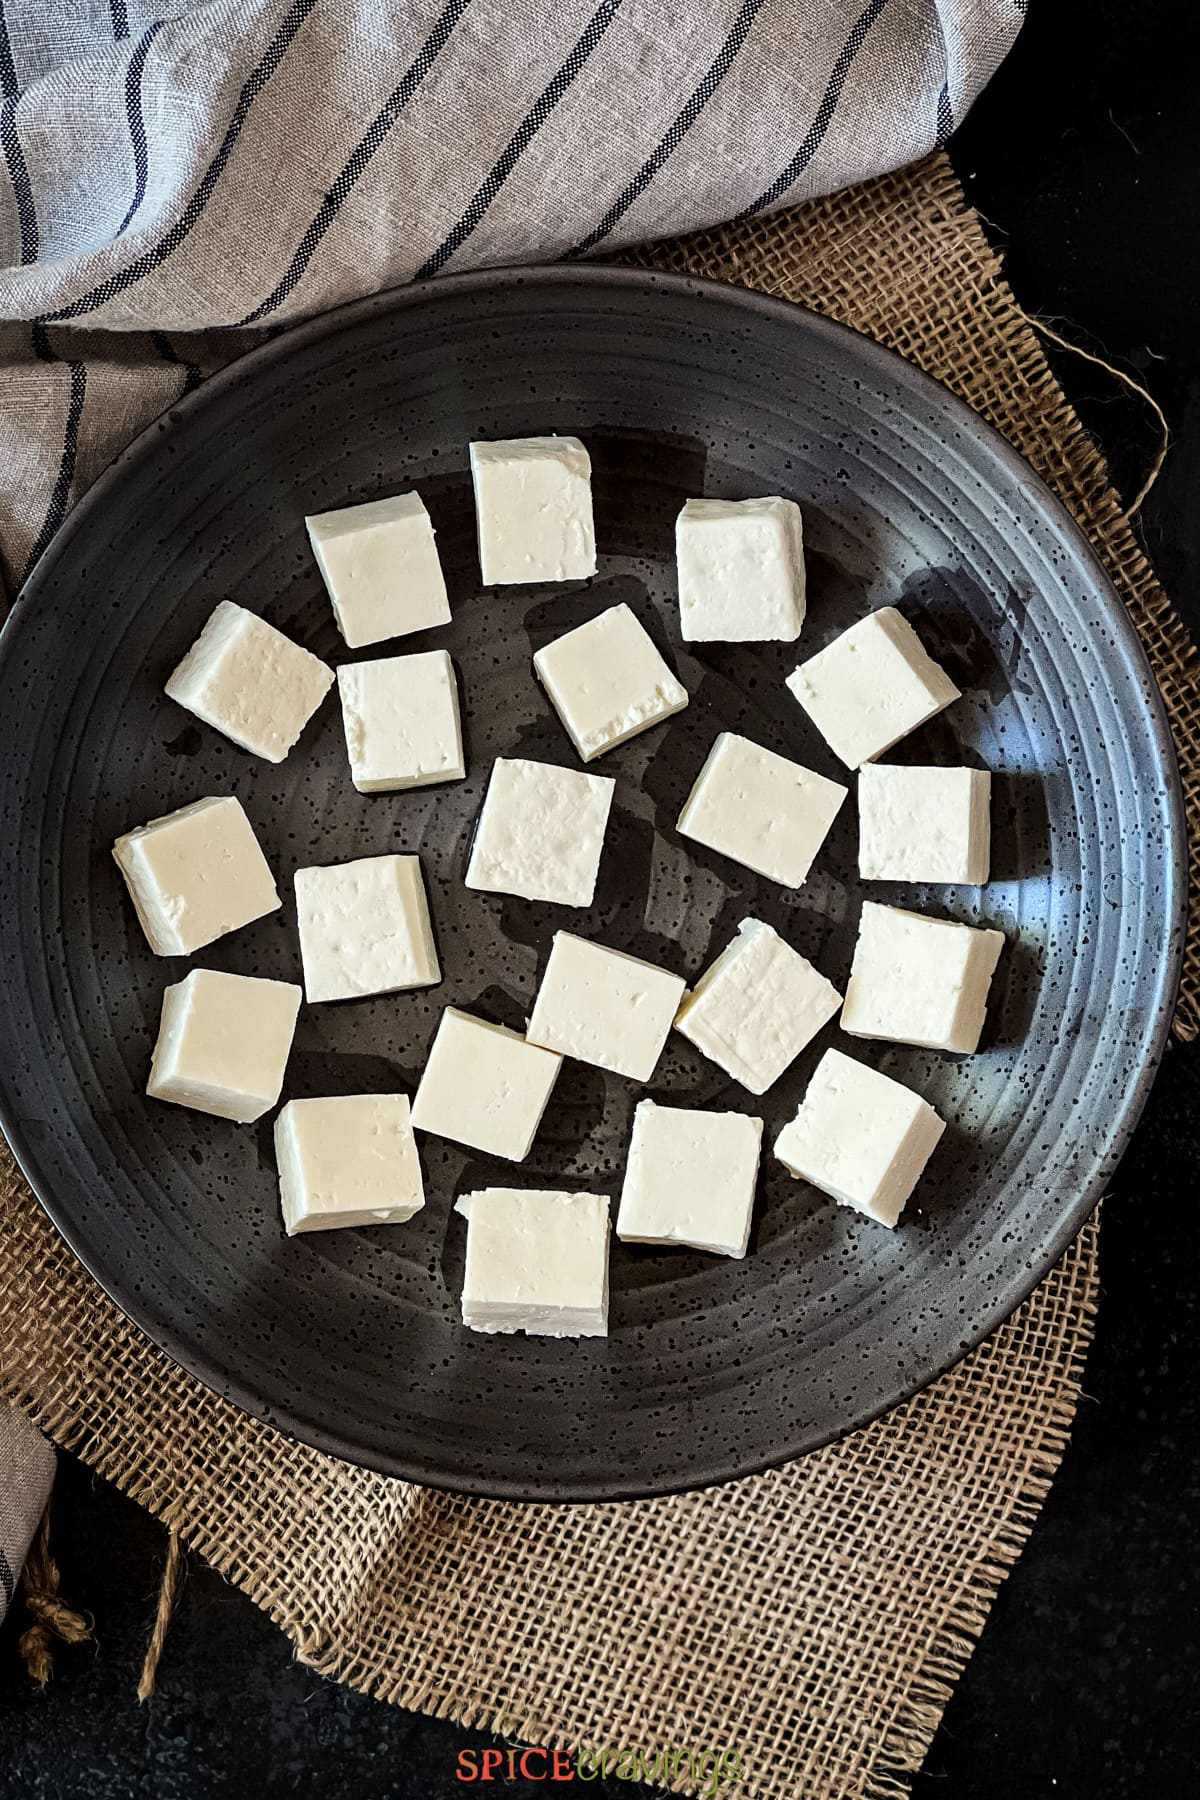 paneer cubes spread out on black plate